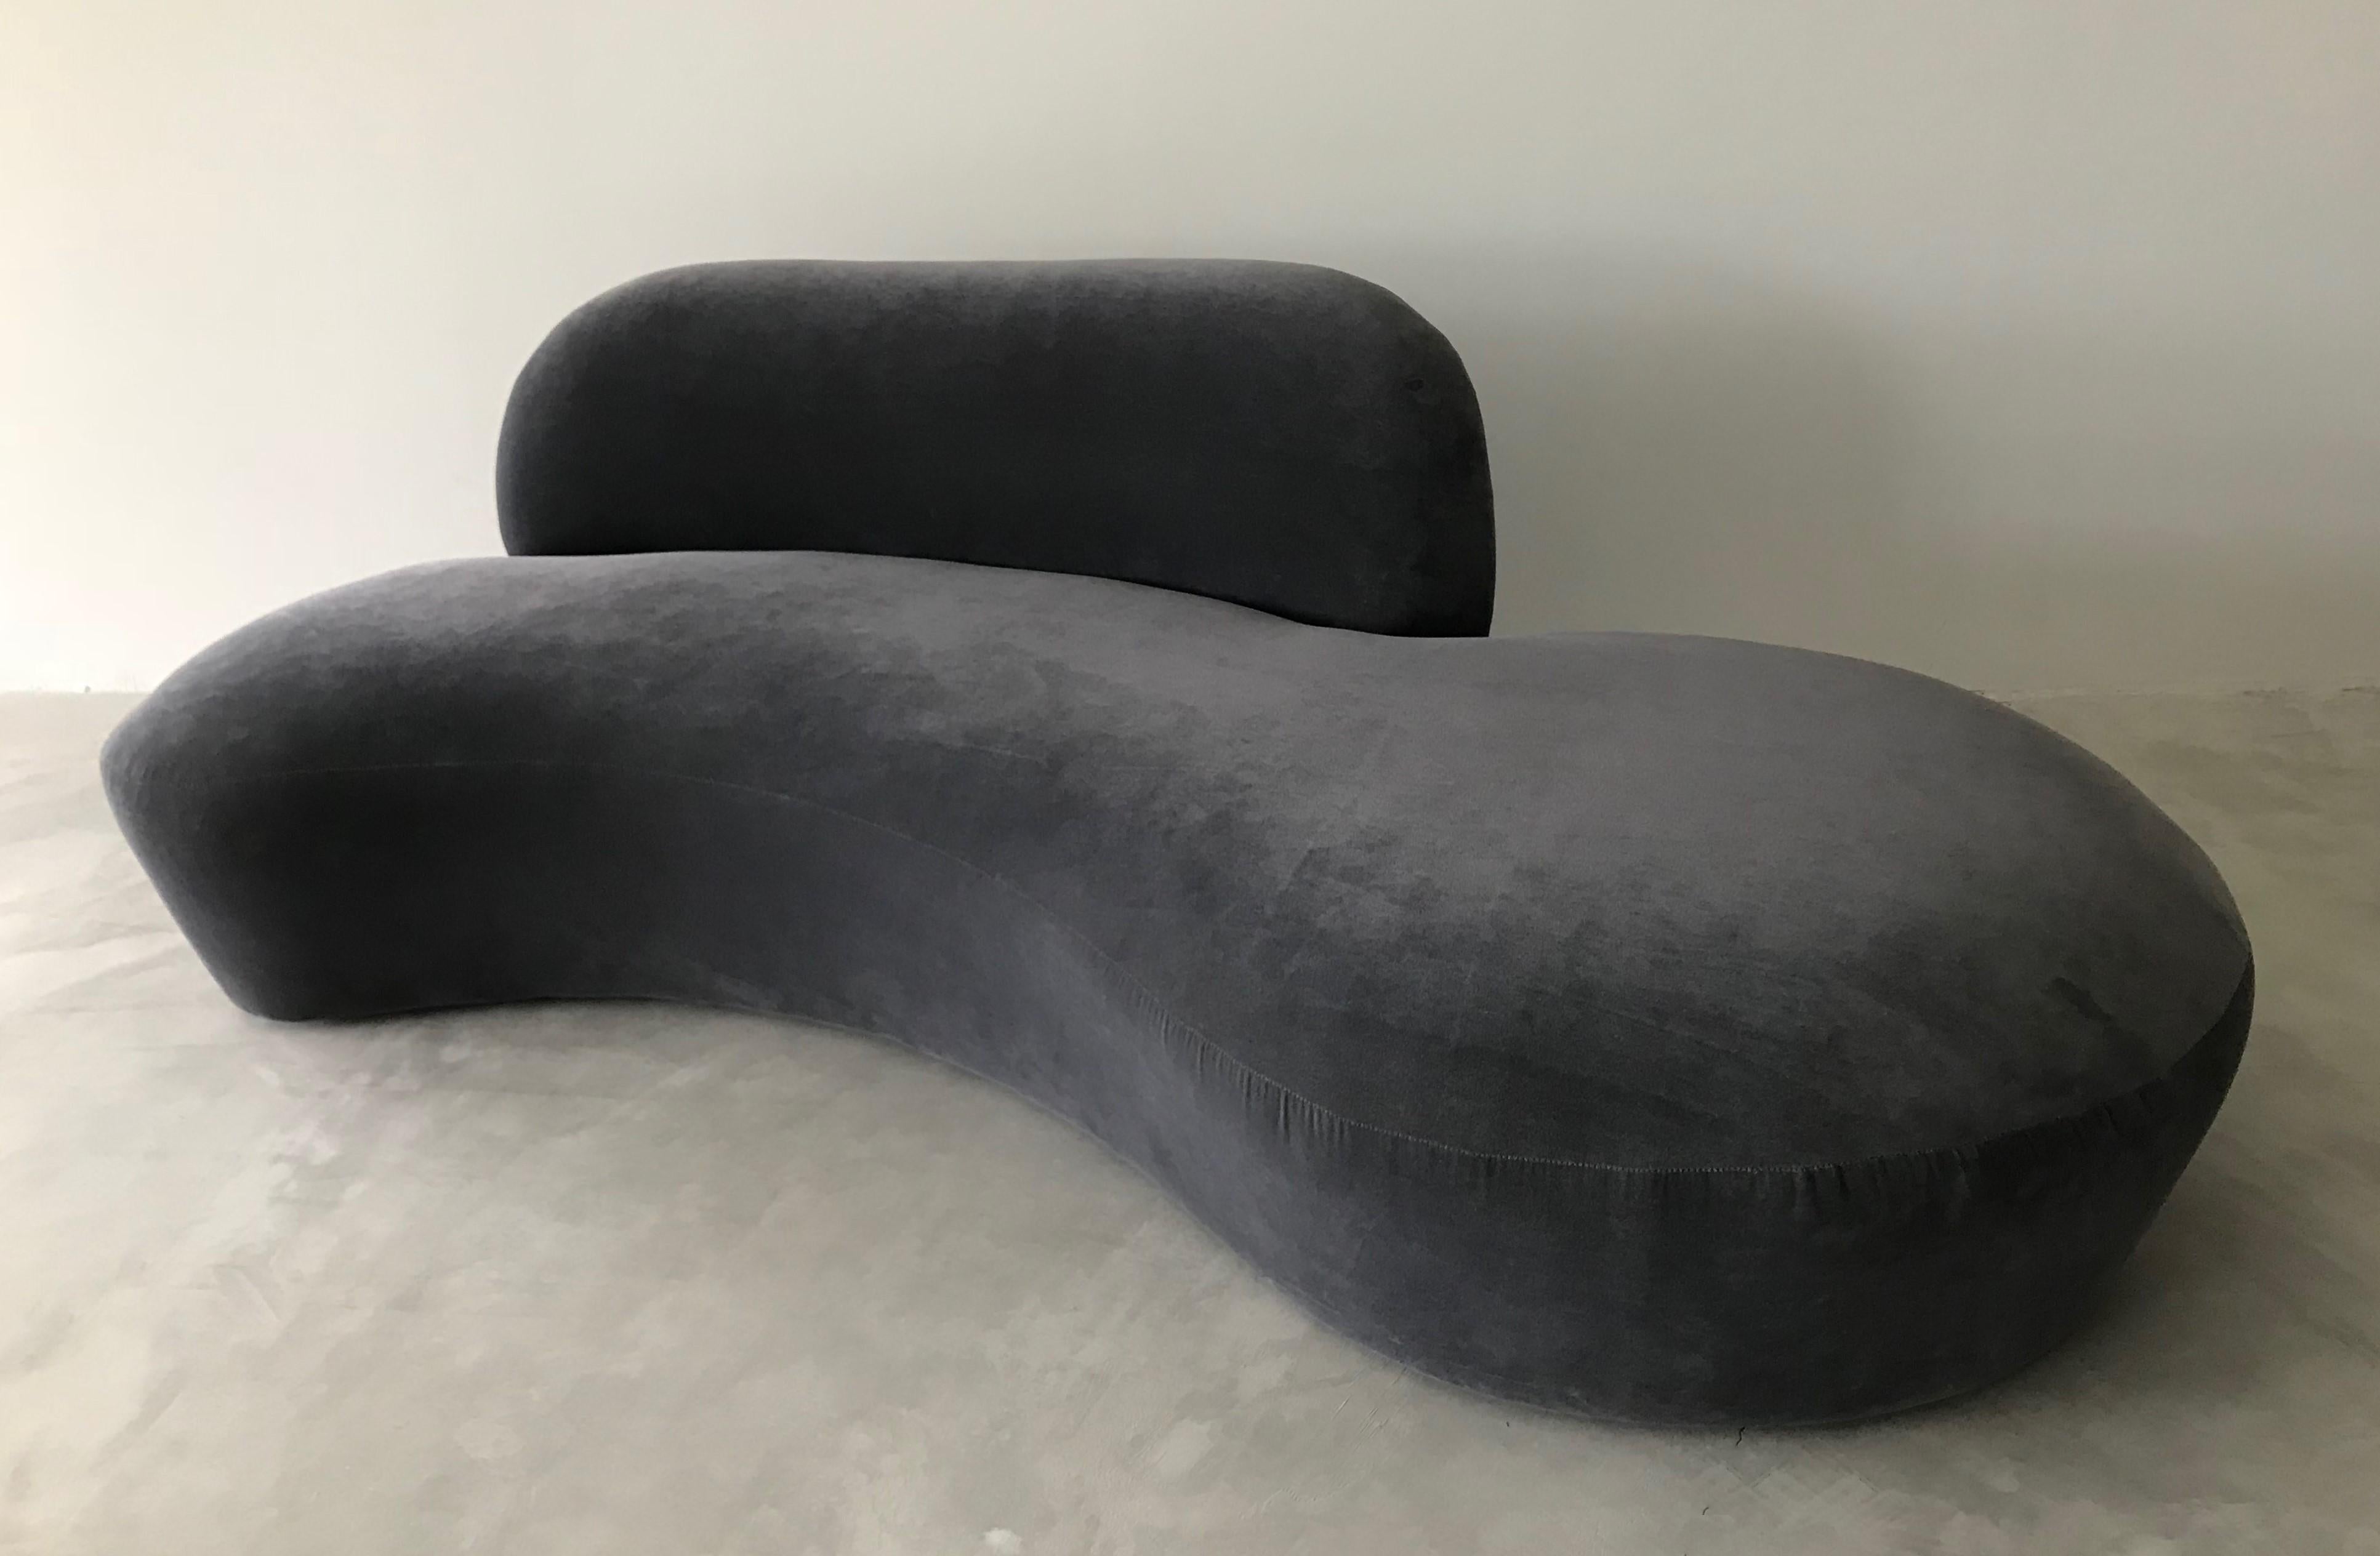 A Vladimir Kagan sofa in it's original dark grey velvet with a form referencing the early organic design movement. Comfortable backrest. Rare version executed in limited numbers for room and board.

Other American designers include: Paul Frankl,